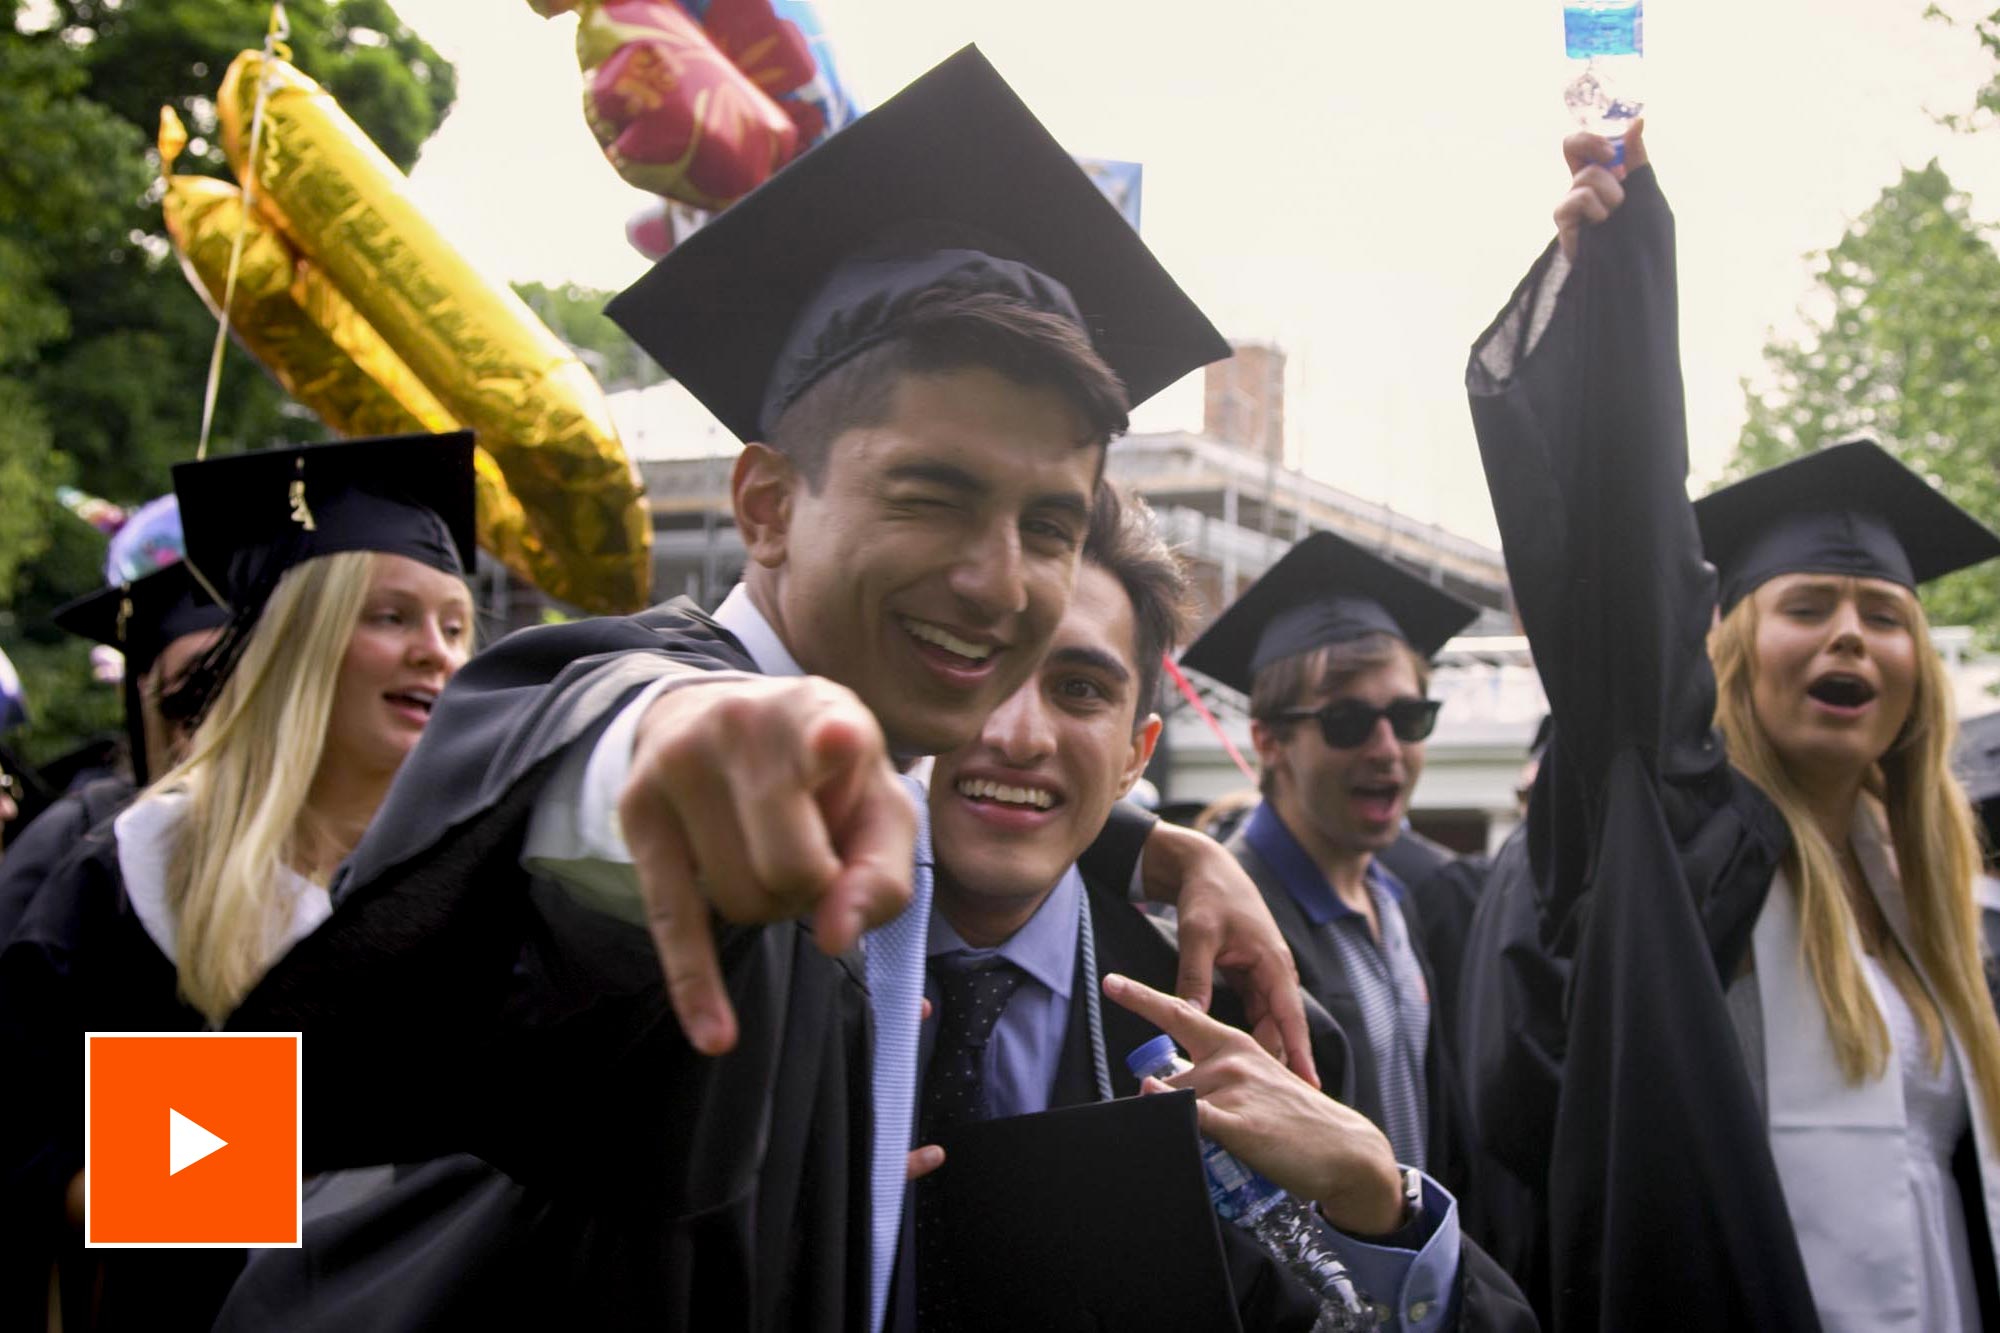 UVA Graduates celebrating with a play button to watch the video